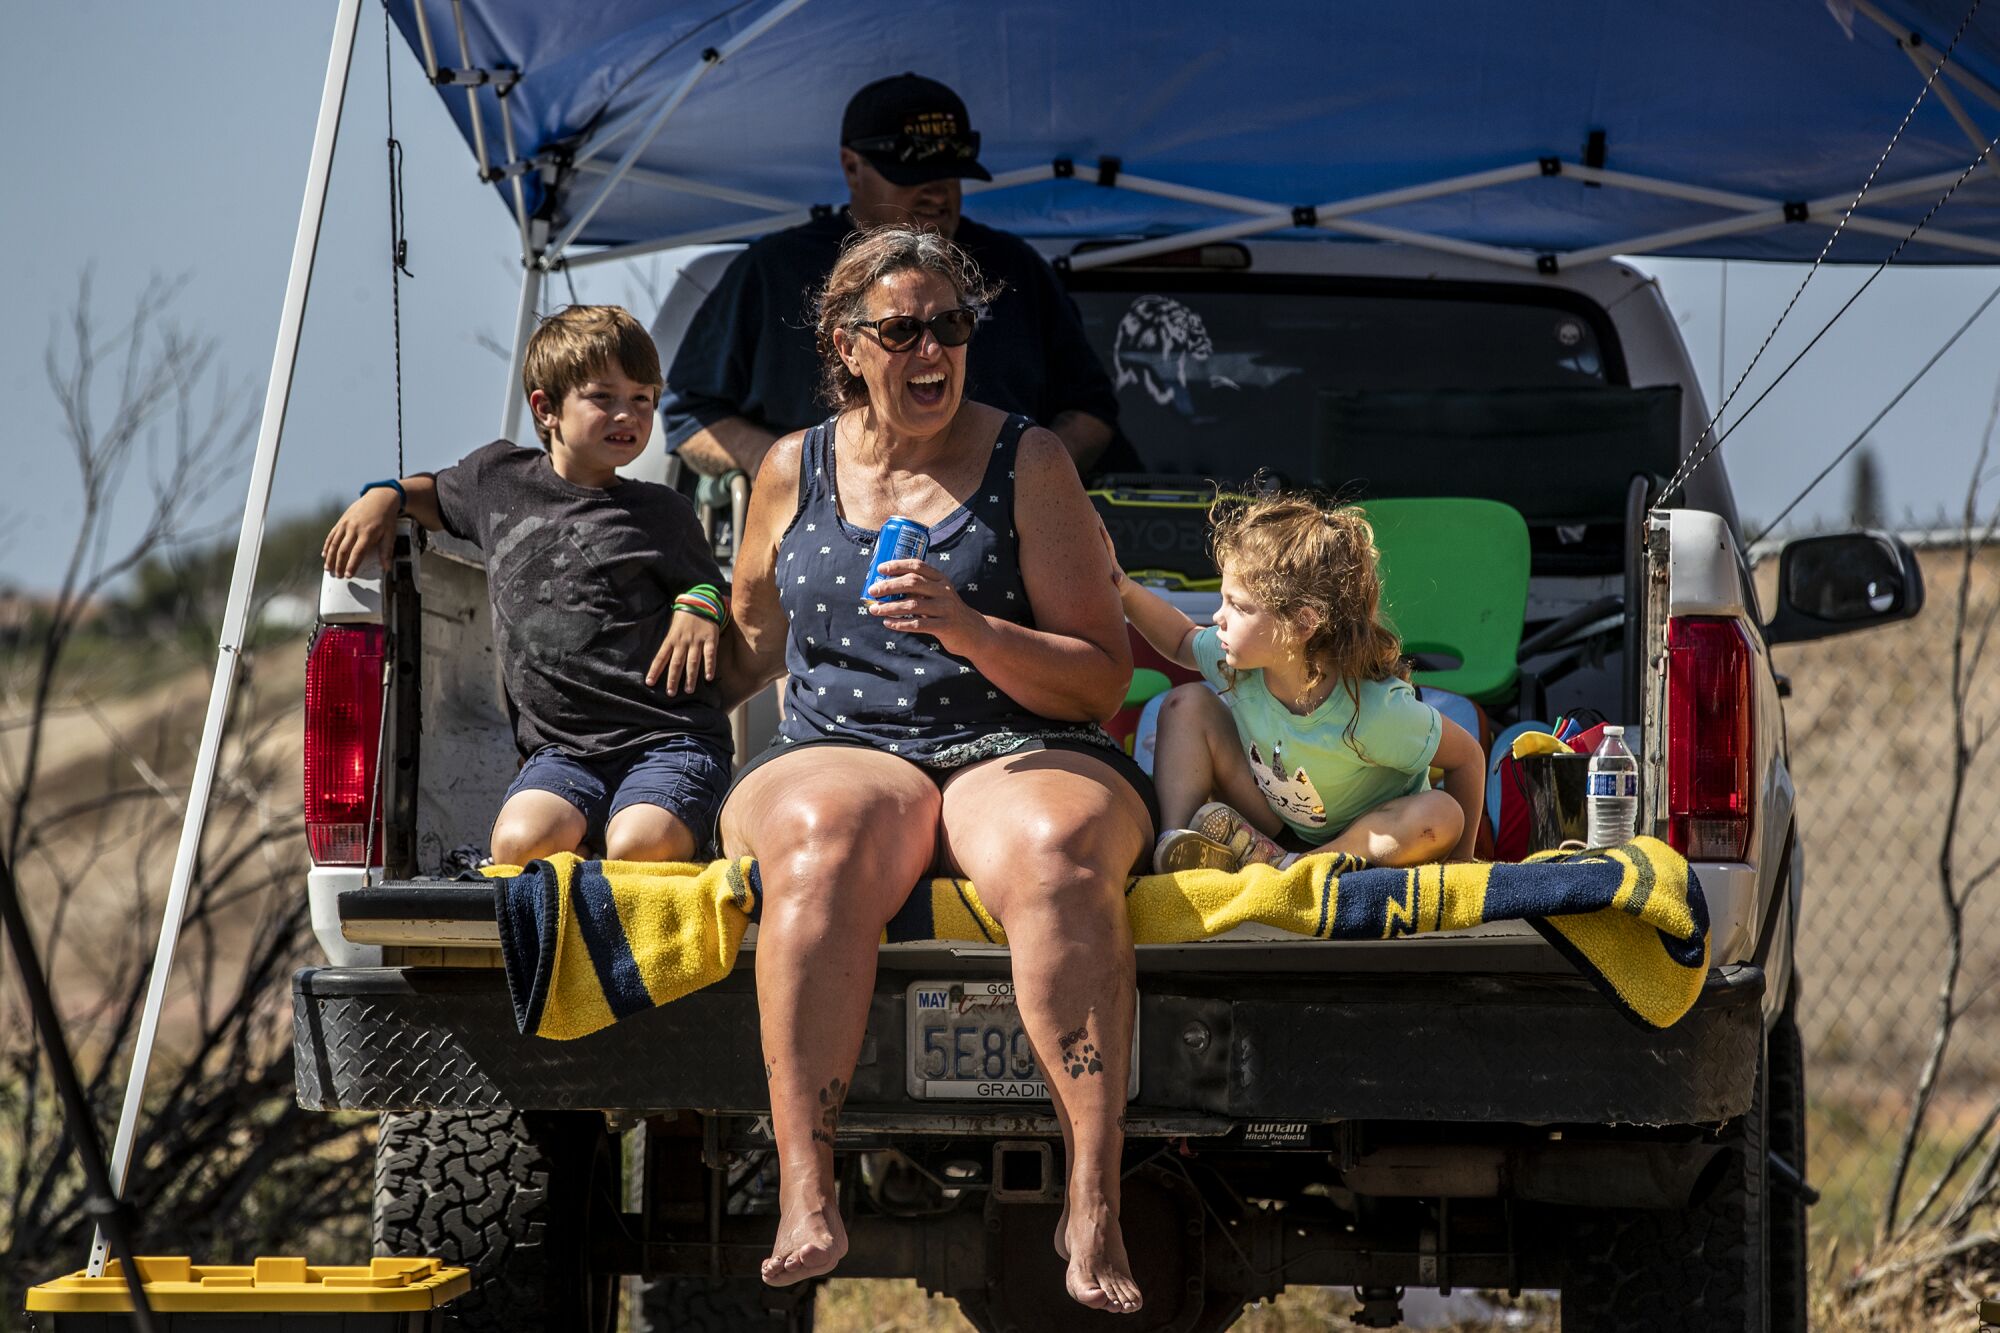  Dawn Sabatino and family cheer on wrestlers from the back of their pickup truck. 